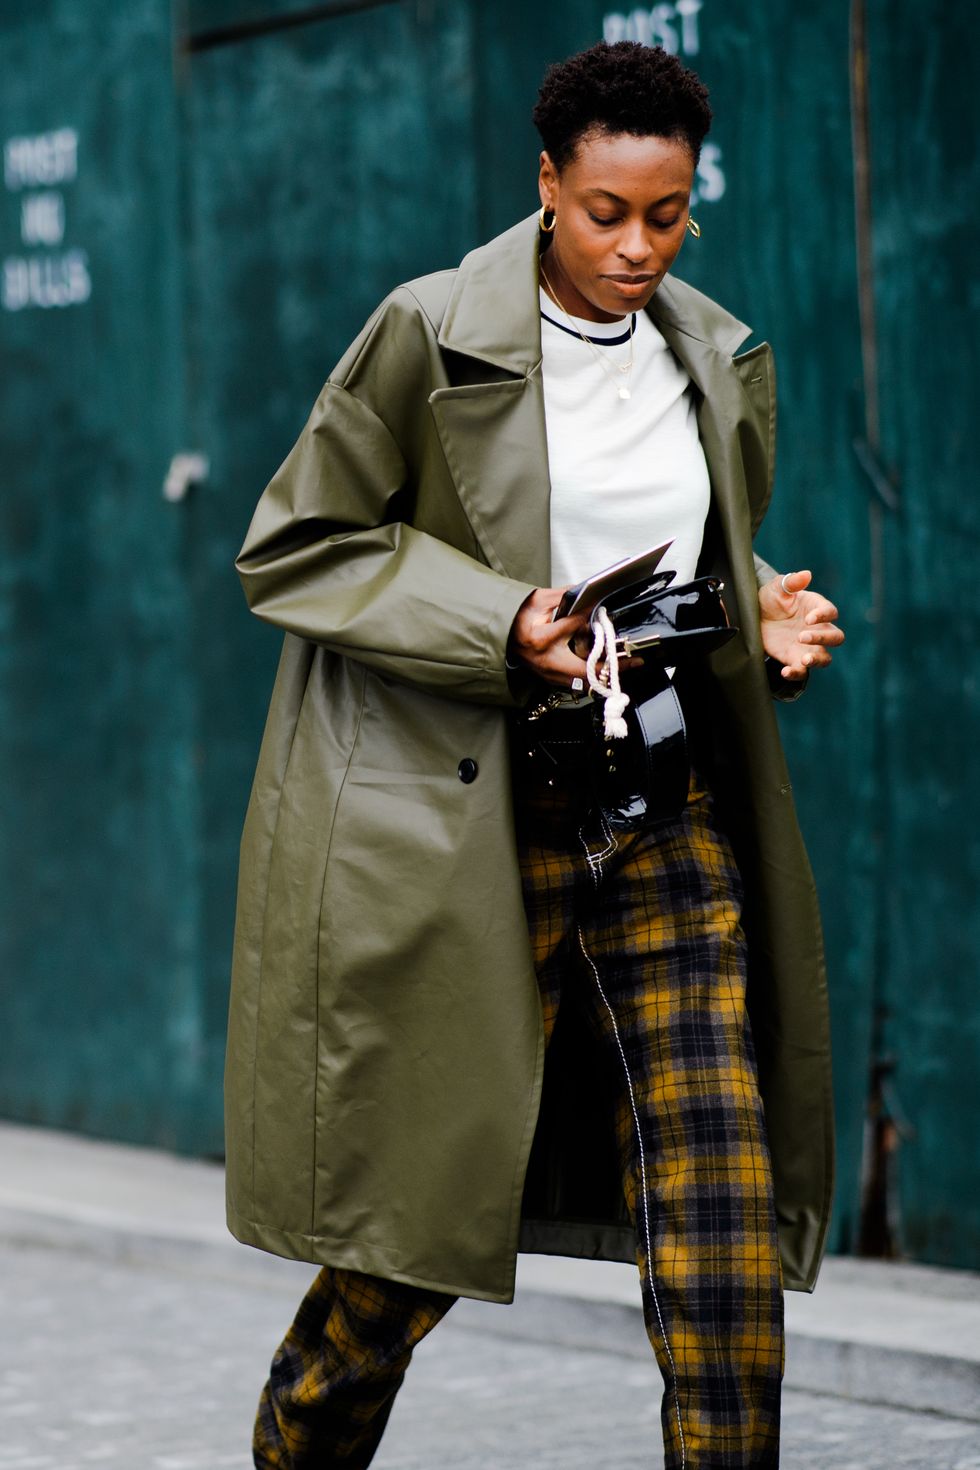 Best Street Style From New York Fashion Week - New York Fashion Week ...